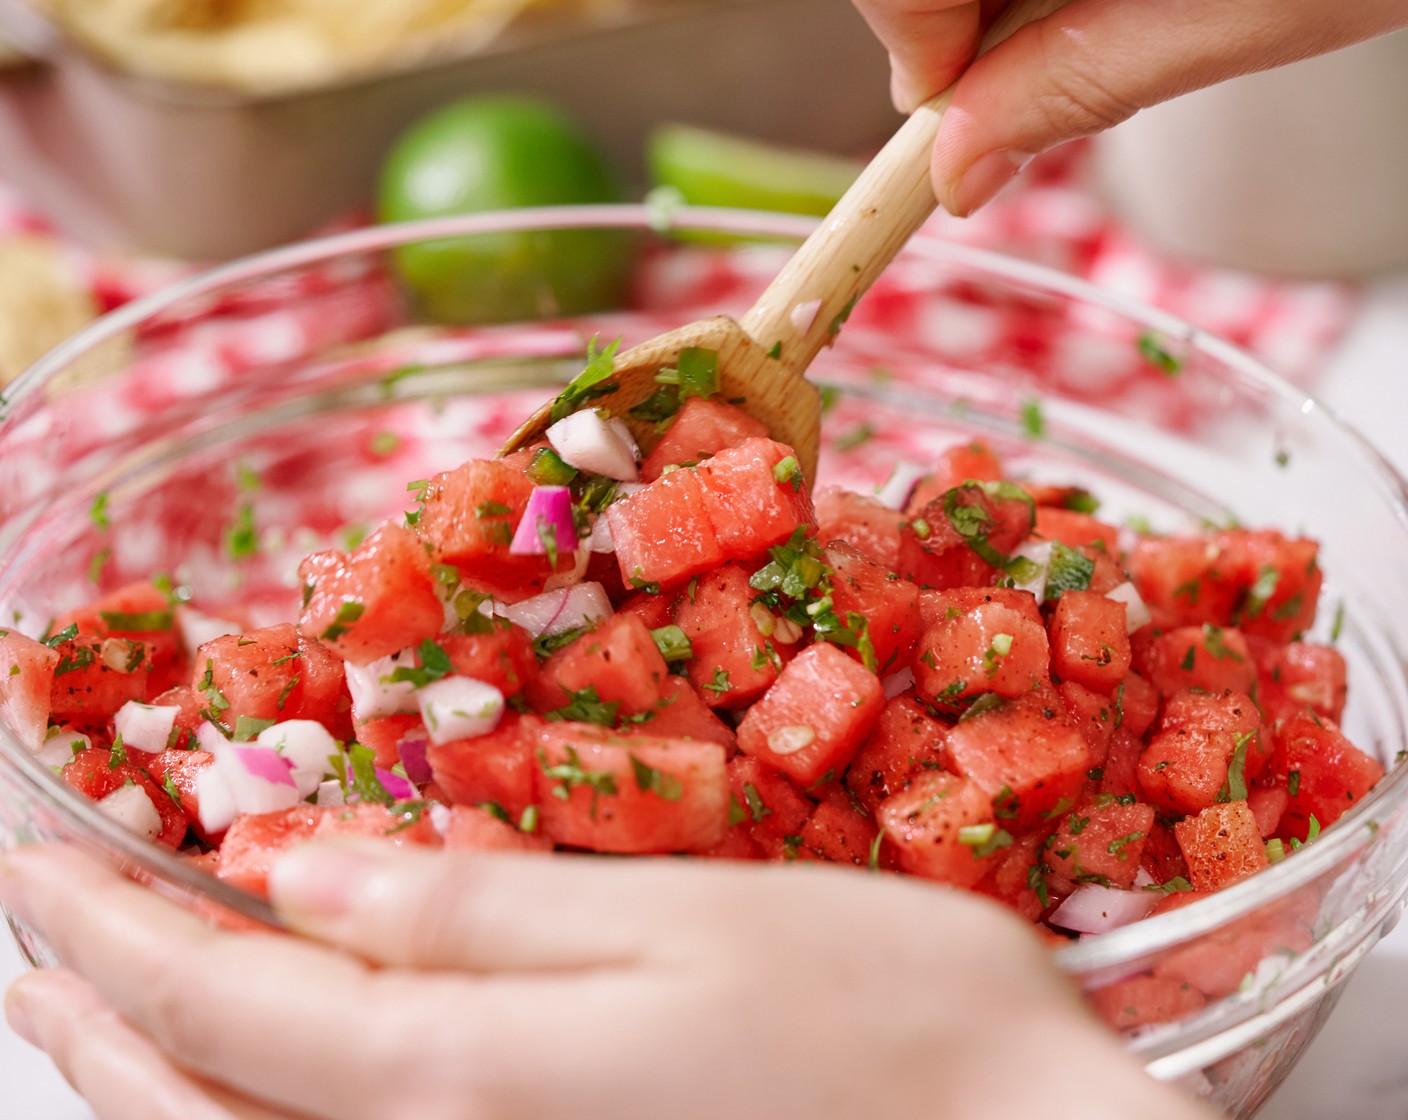 step 2 In a large bowl, add the watermelon cubes, Red Onion (1/4), Jalapeño Peppers (2), Fresh Cilantro (1 bunch), Fresh Mint (1 stalk), Lime (1), and Tajin (3/4 tsp). Use a spatula to gently mix until well combined. Optionally, leave the salsa in the fridge for at least 15 minutes.